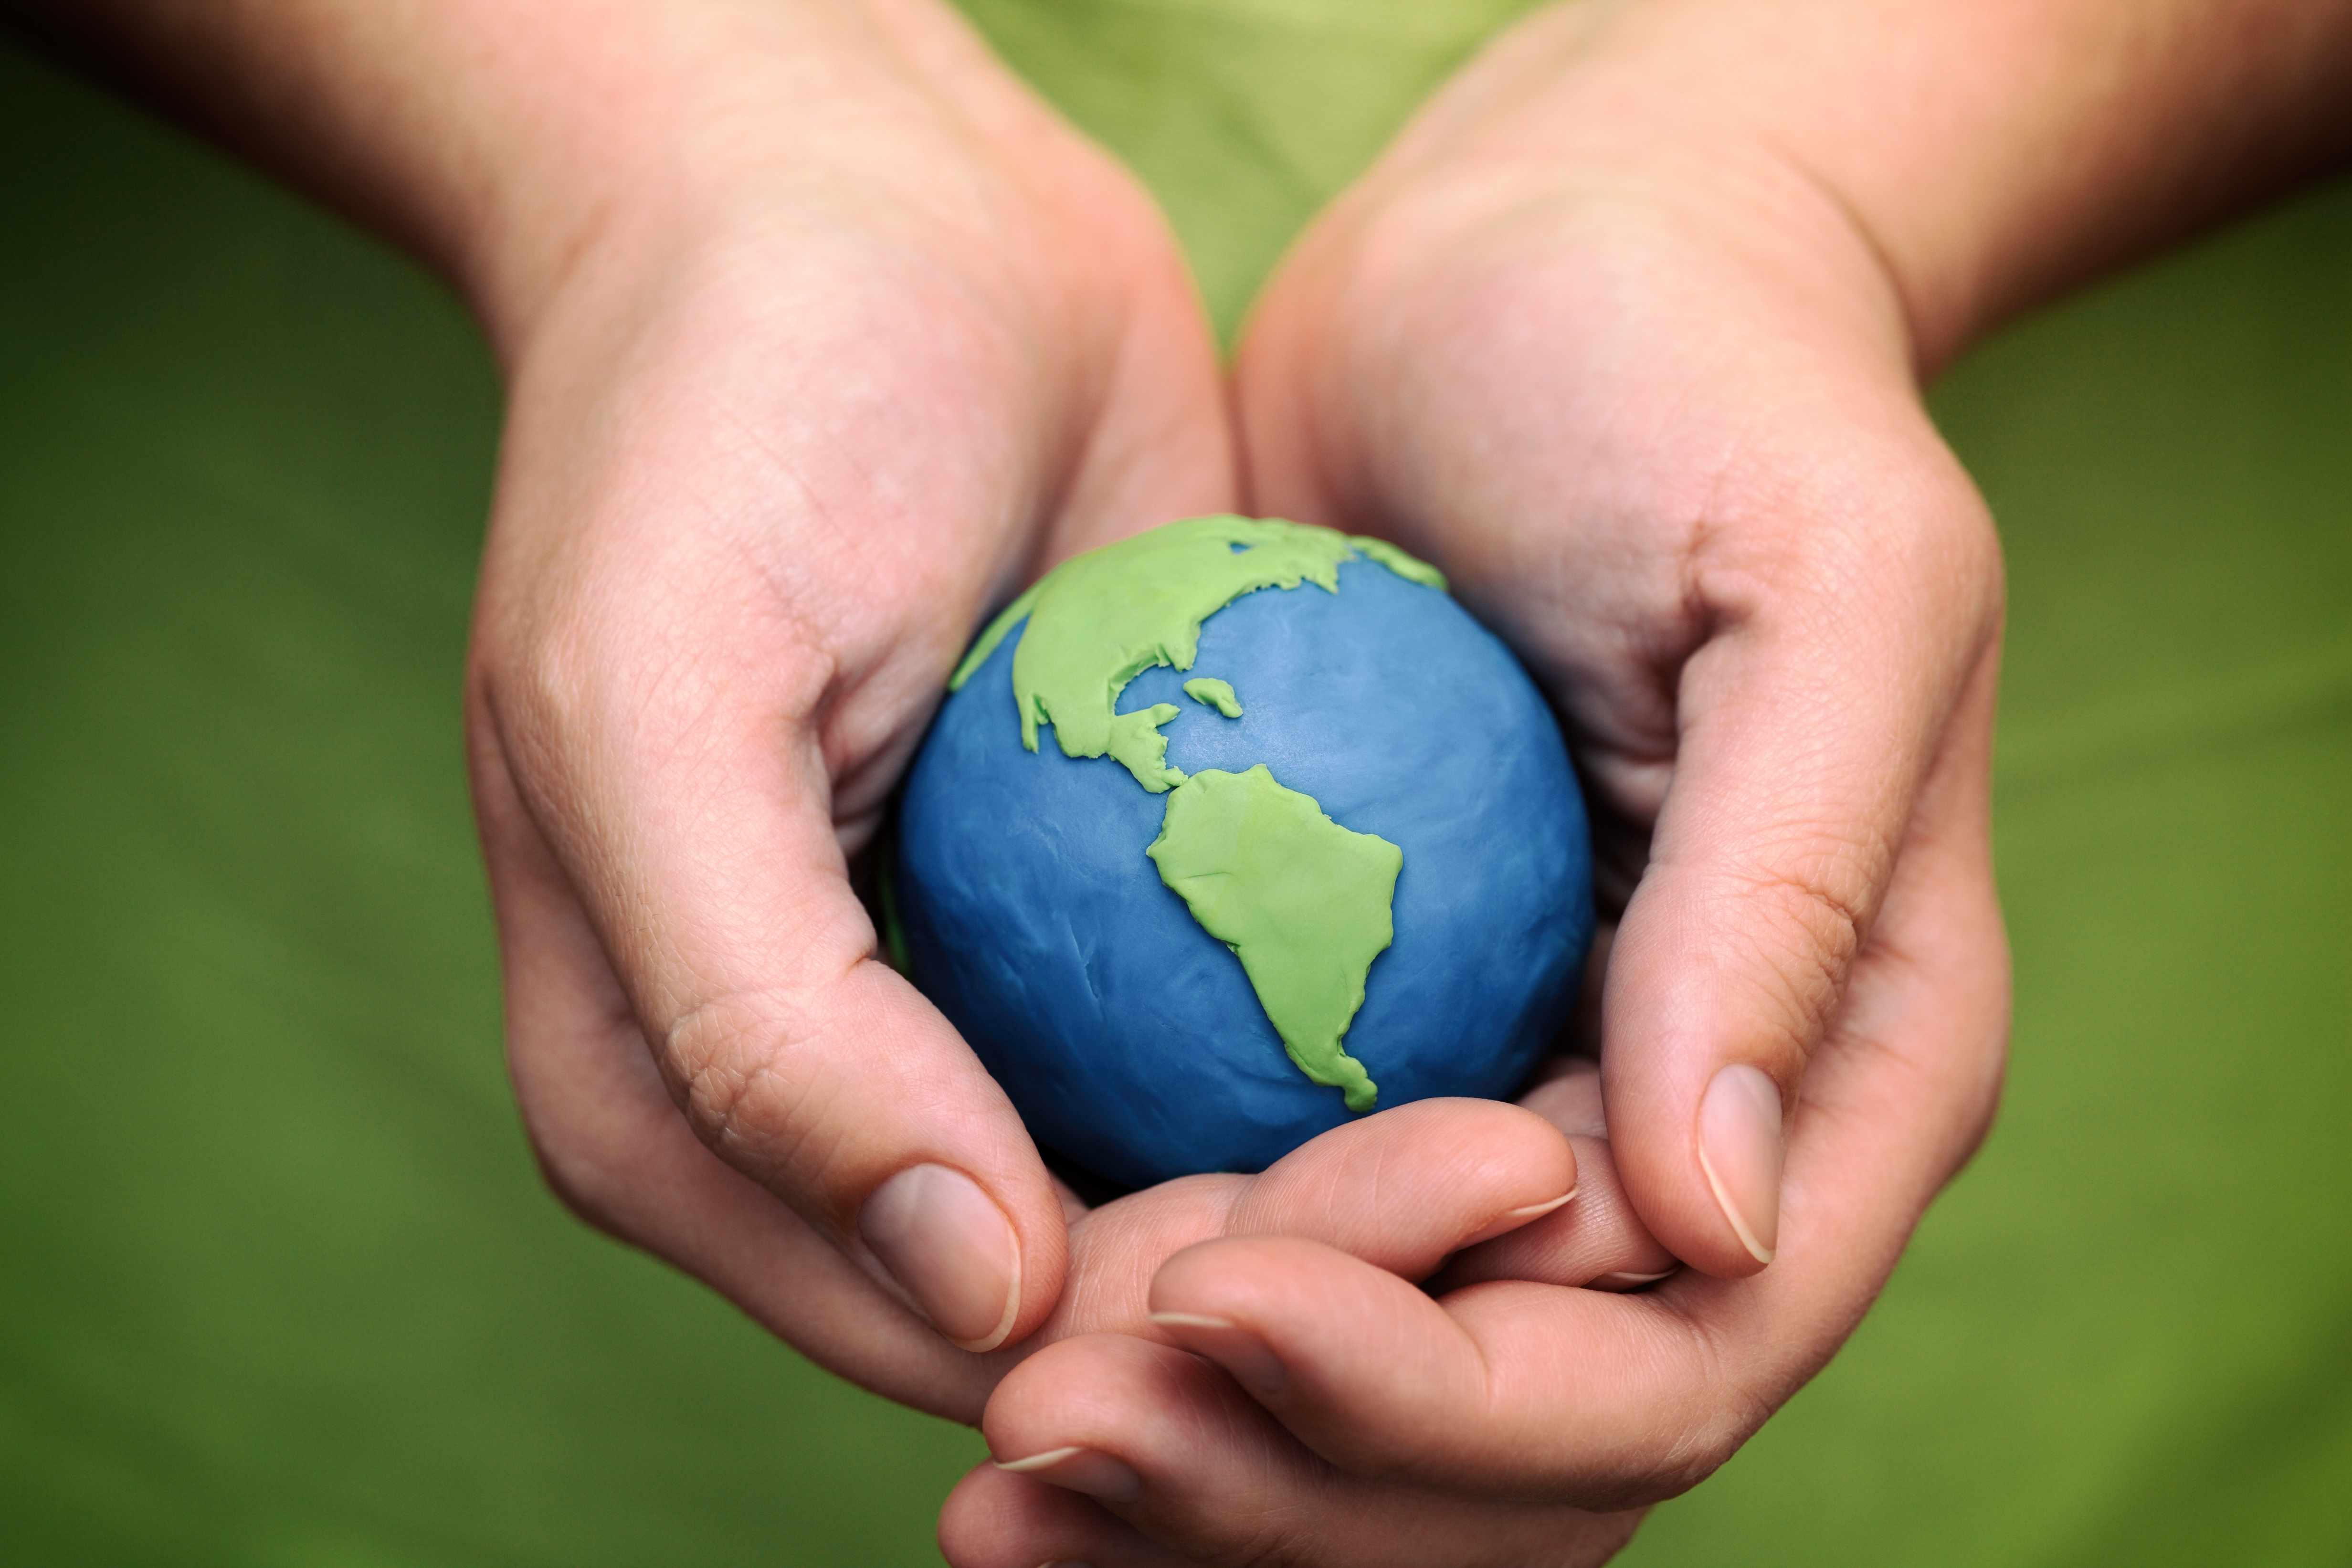 two hands holding a clay model of the earth, the world, a globe